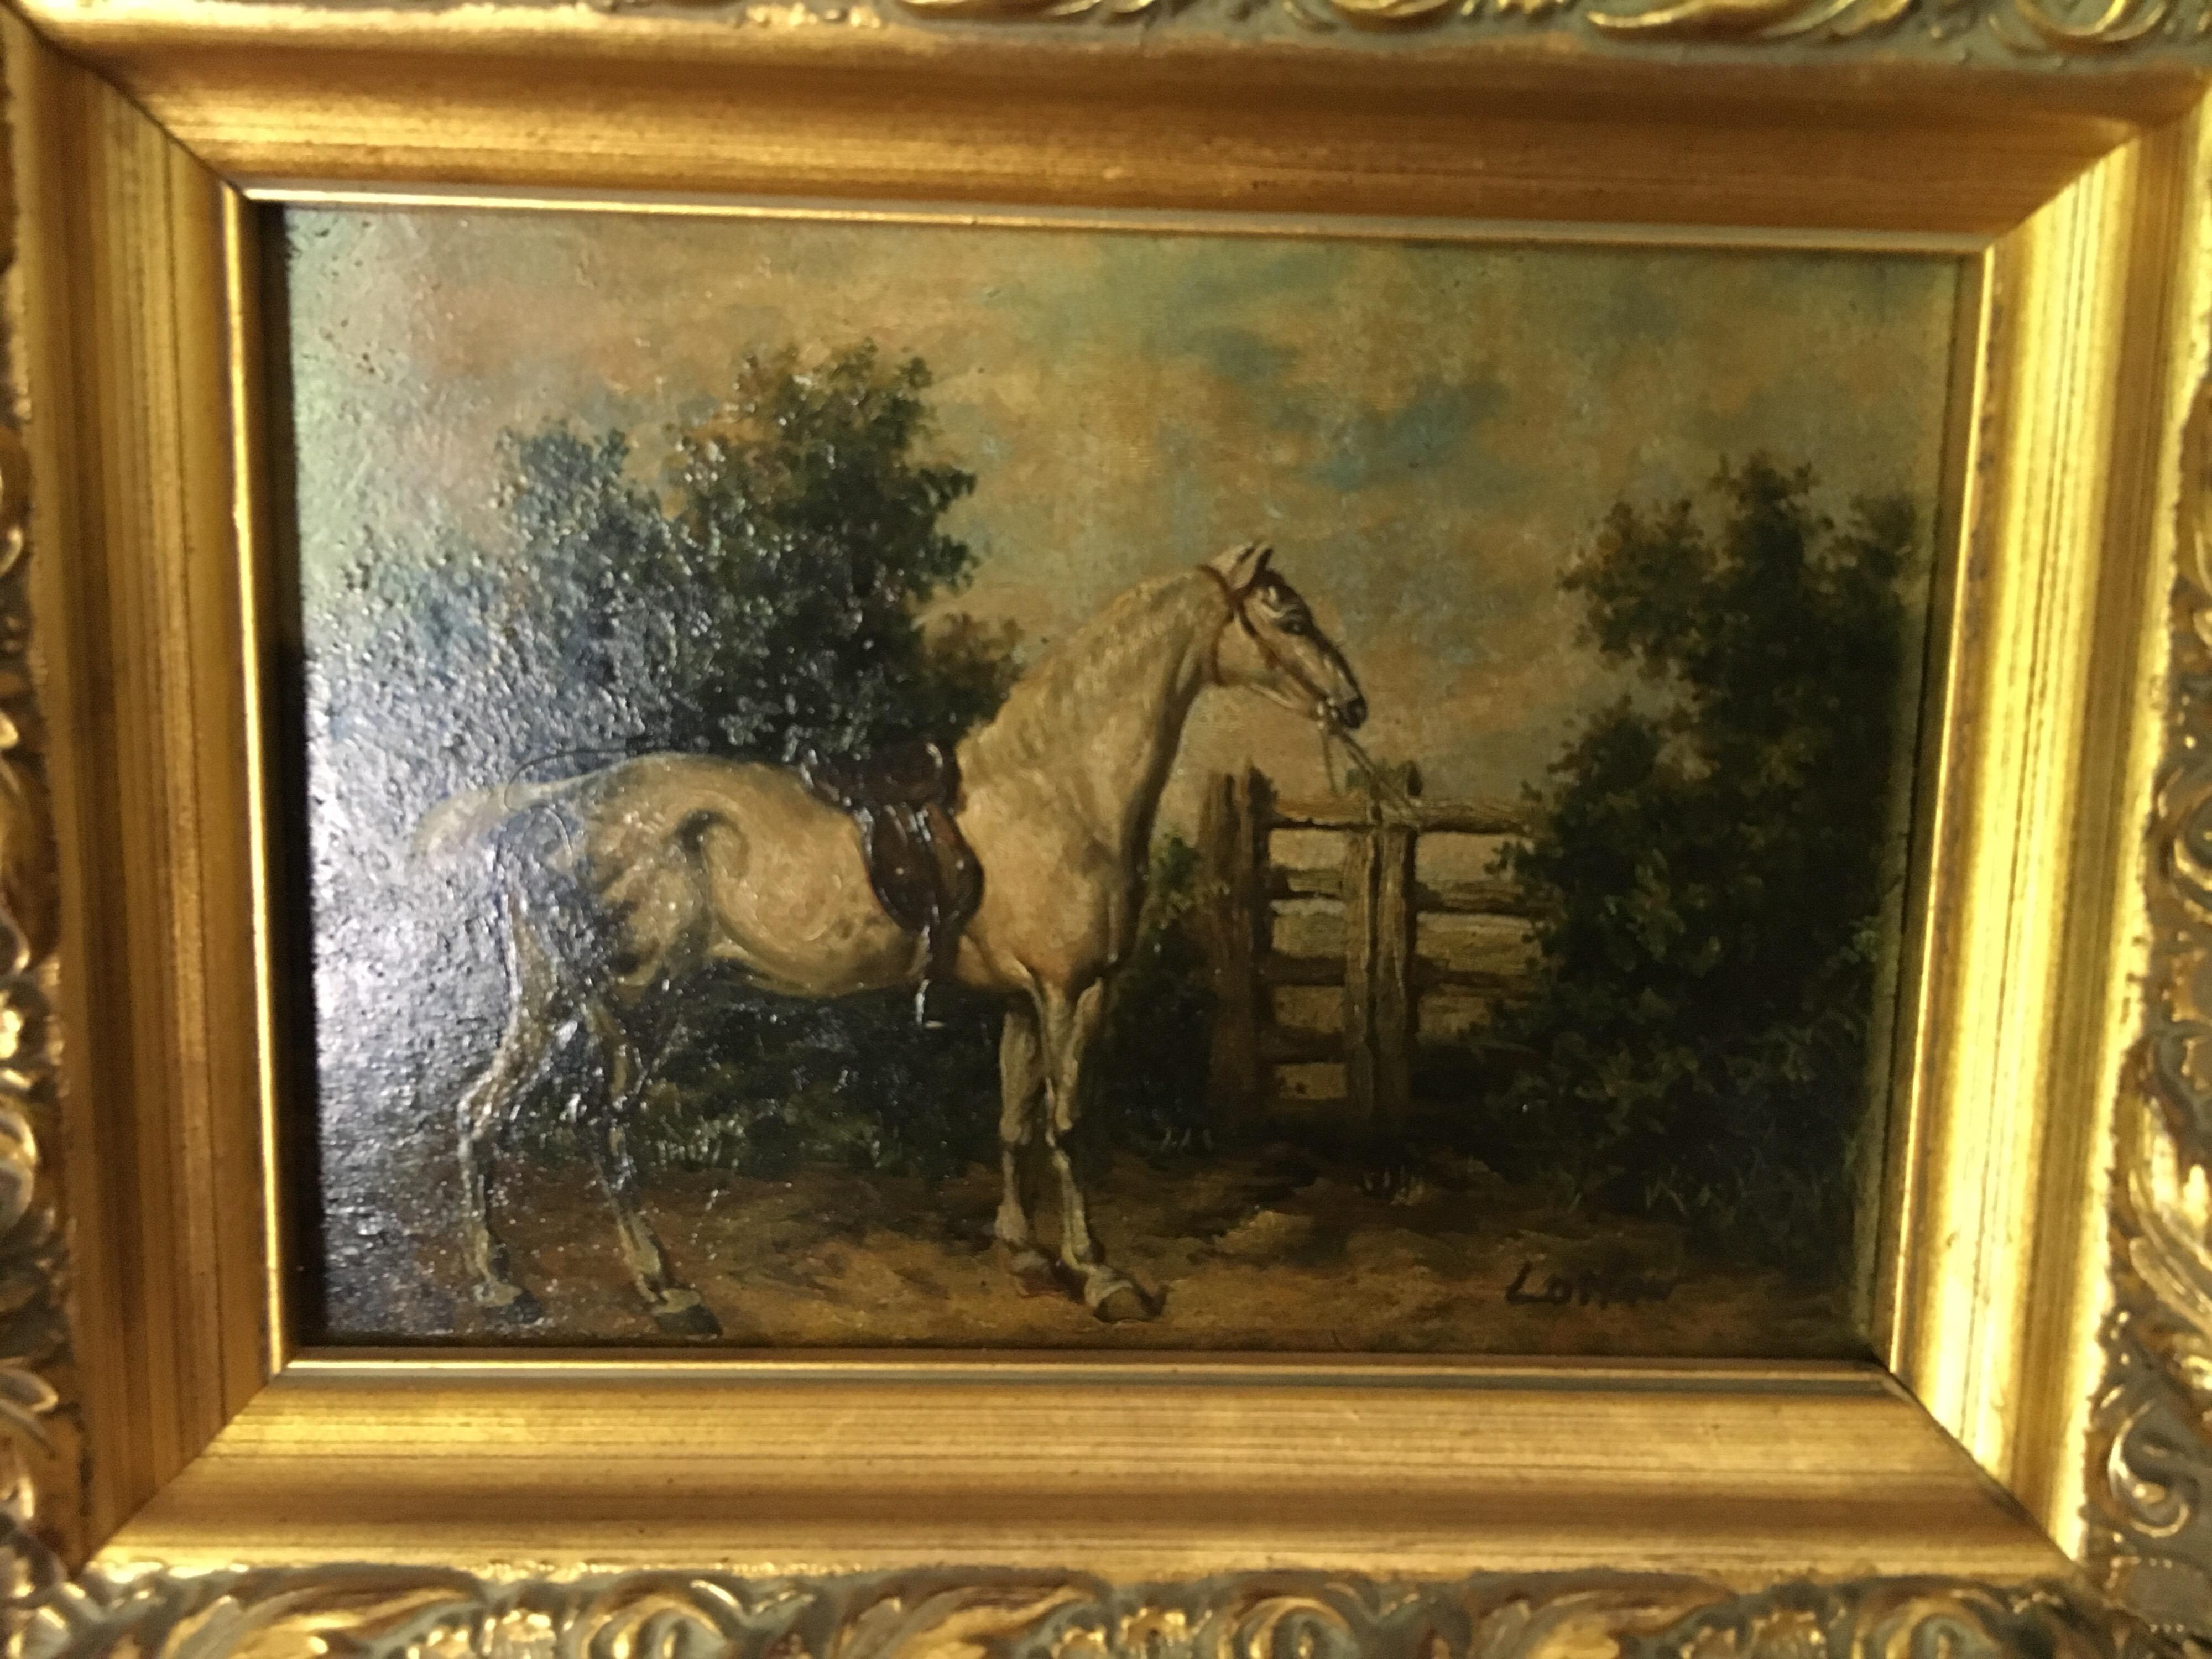 Lovely classical petite painting of a horse in evocative English style countryside. Oil on board. Artist unknown, circa 1900.

Listed dimensions without frame. With frame dimensions: 13